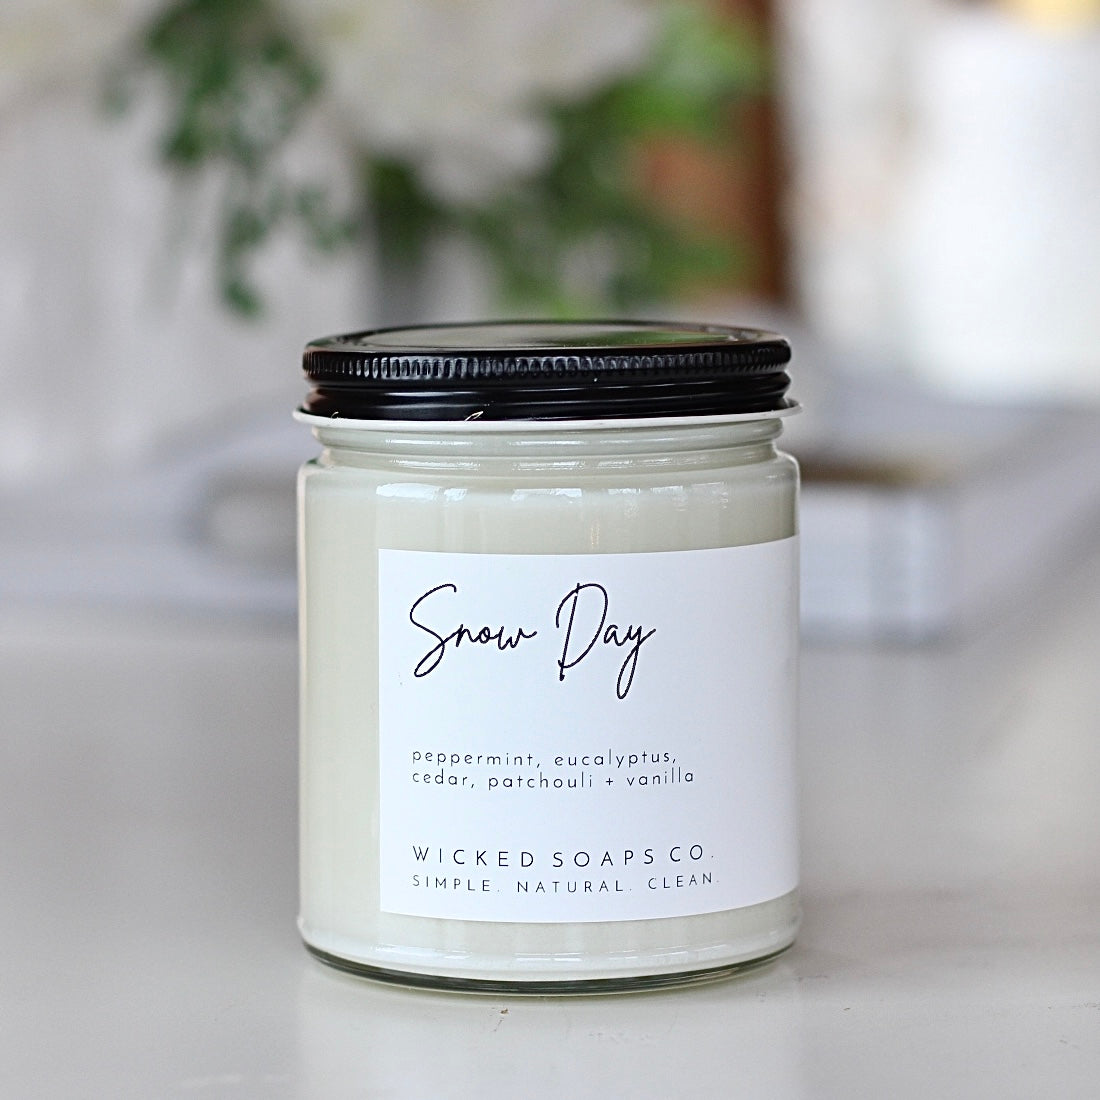 Snow Day Minimalist Soy Candle